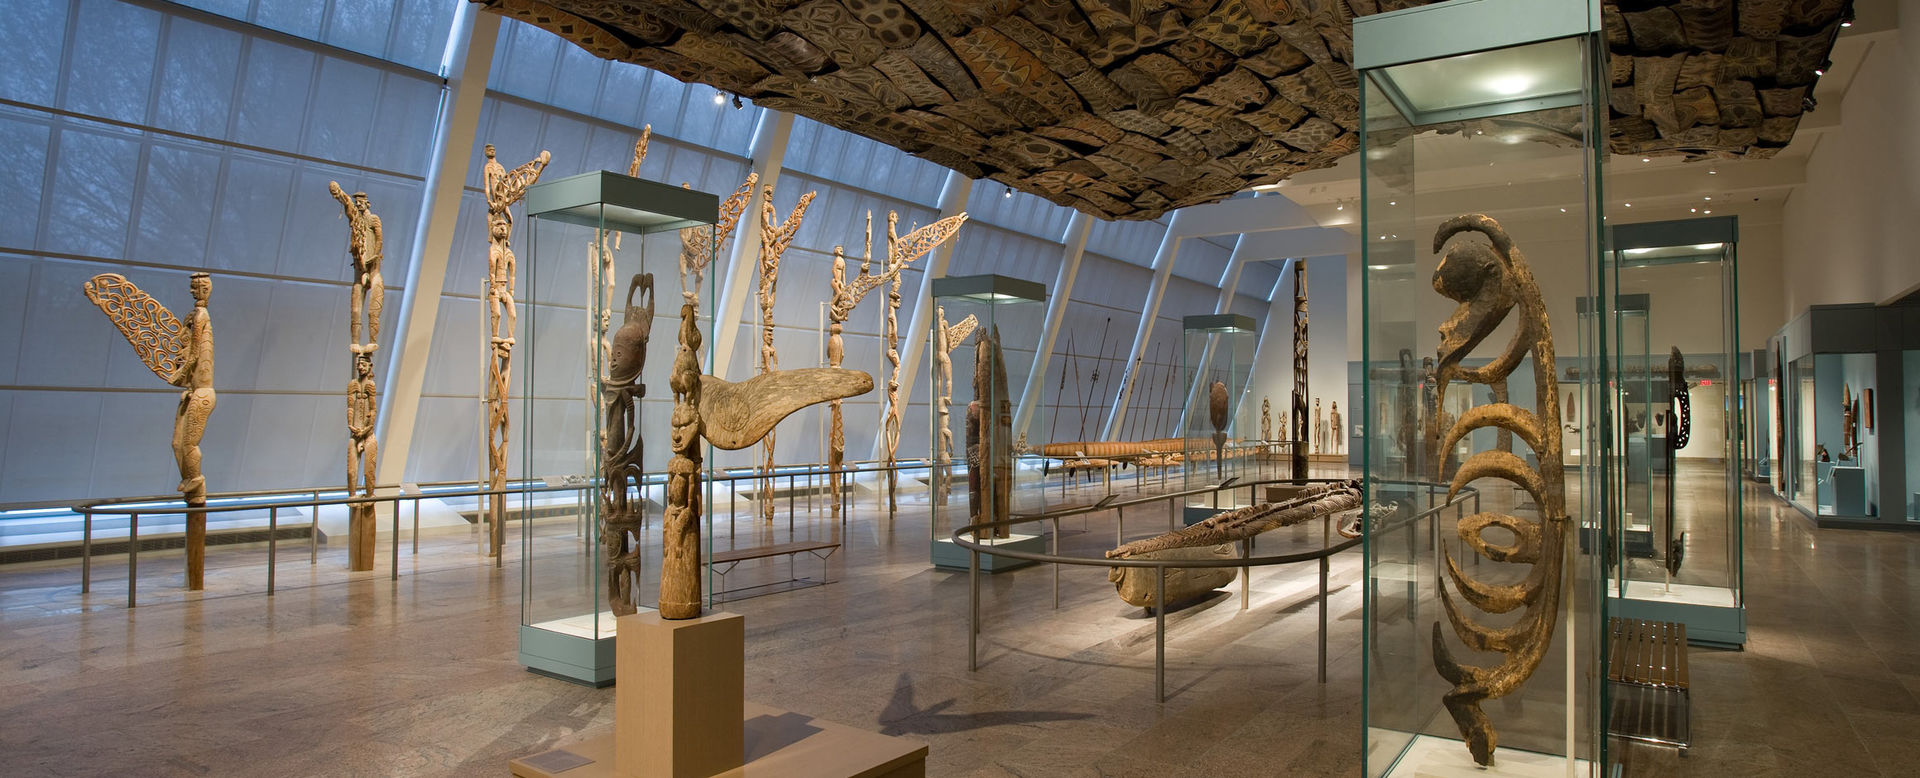 A glass-enclosed gallery with wooden sculptures from Oceania